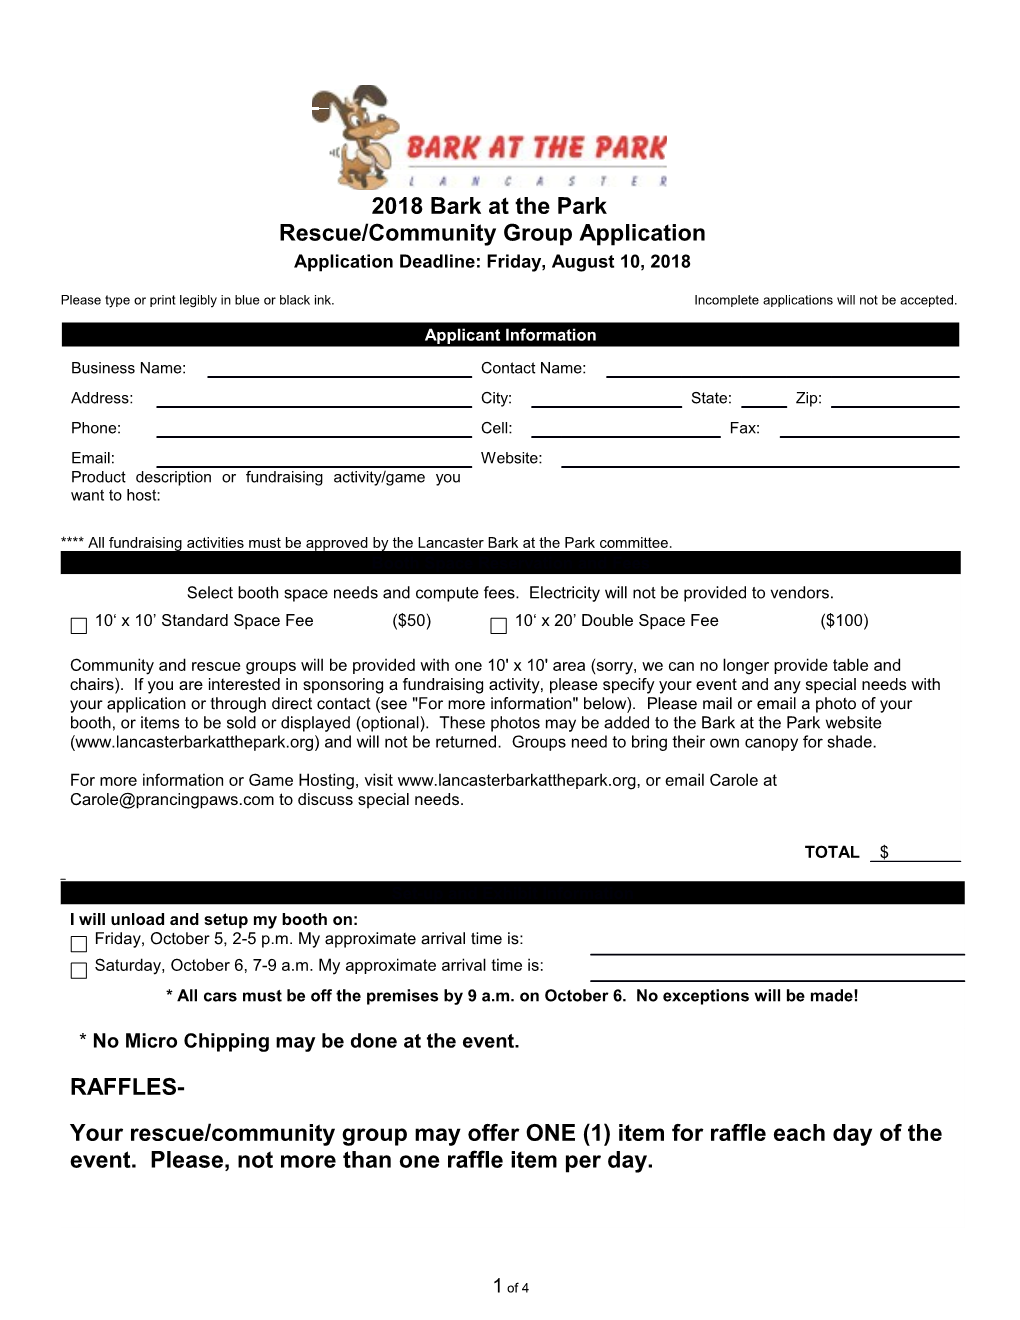 2018Bark at the Park Rescue/Community Group Application